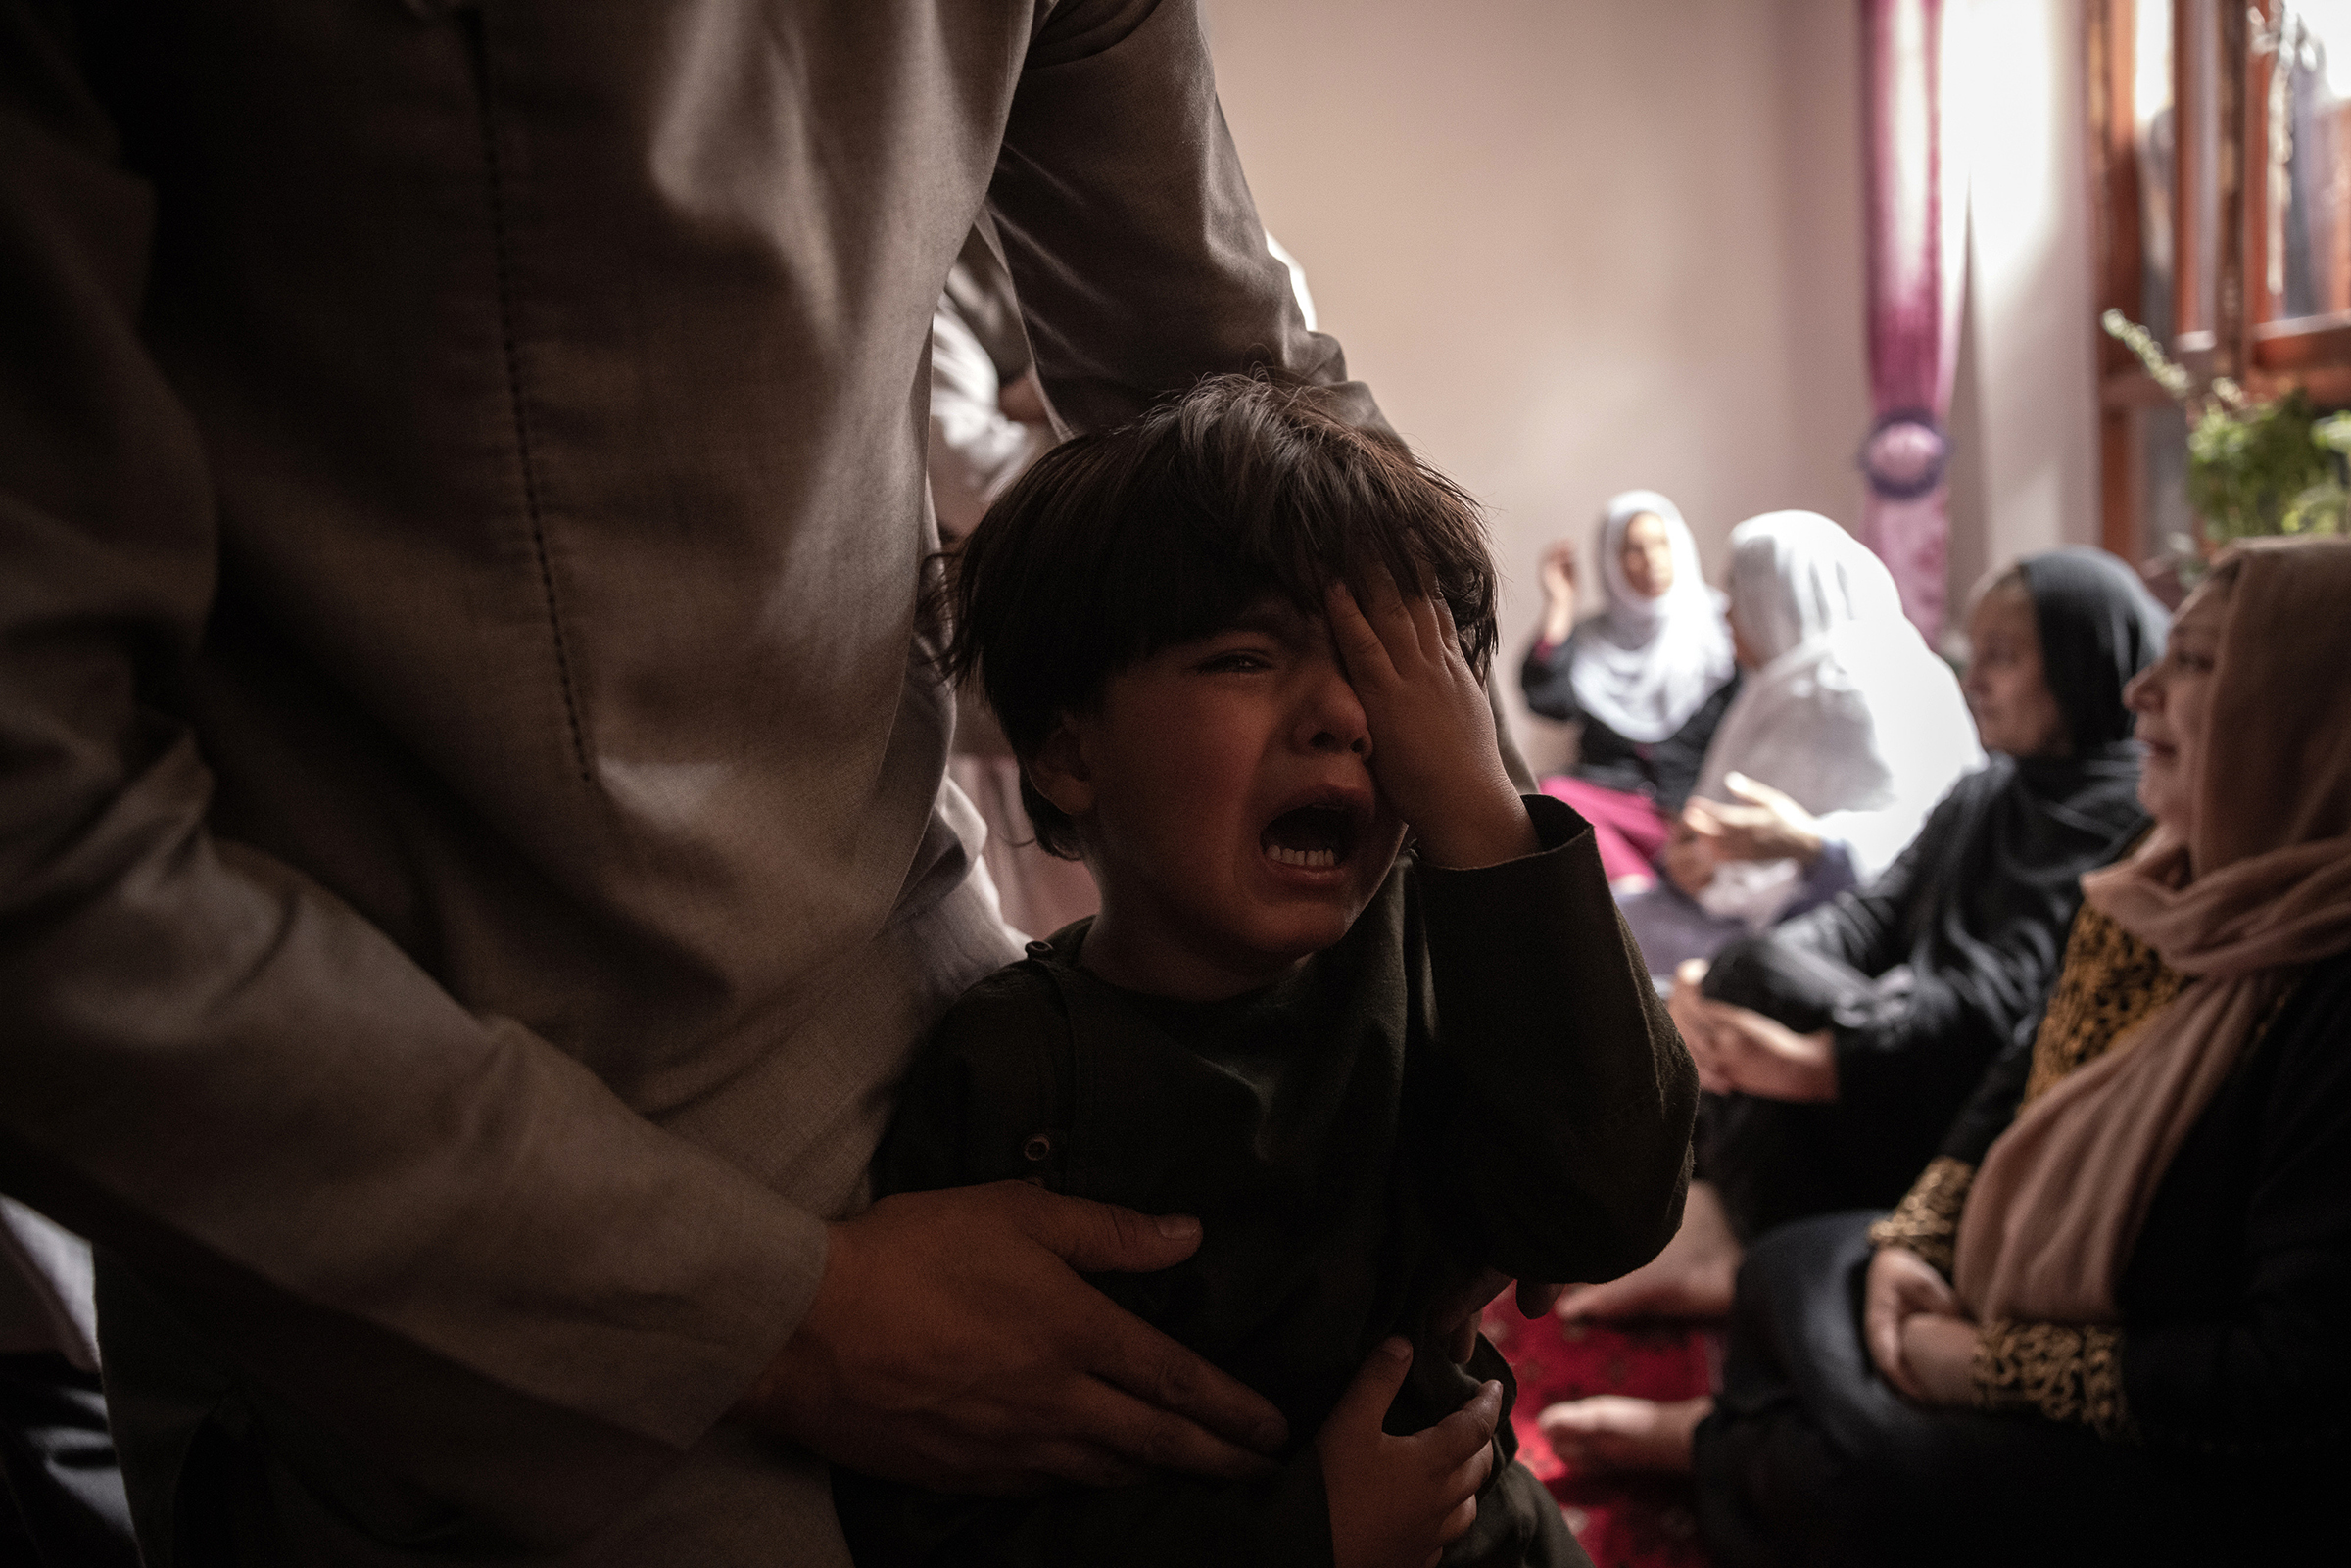 A boy cries over the death of his sister in the drone strike.